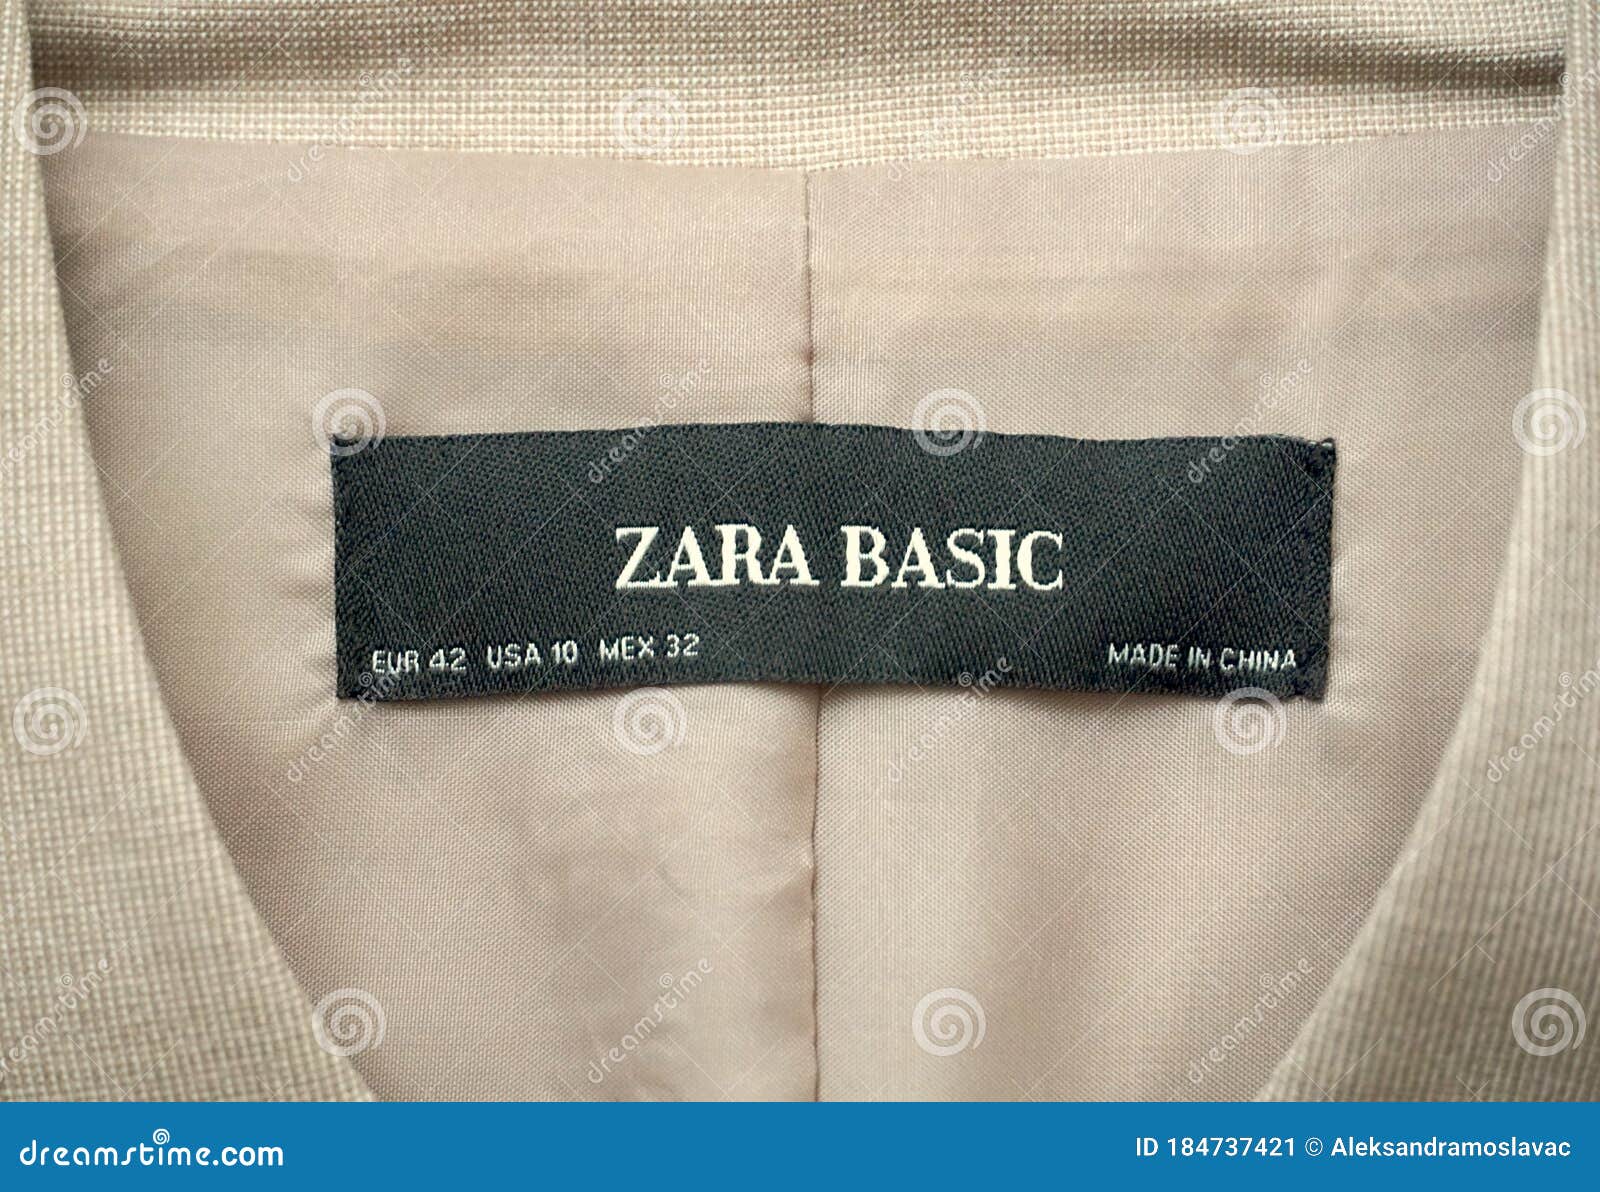 Zara Brand Clothing Made in China, with View of Fabric Texture and ...